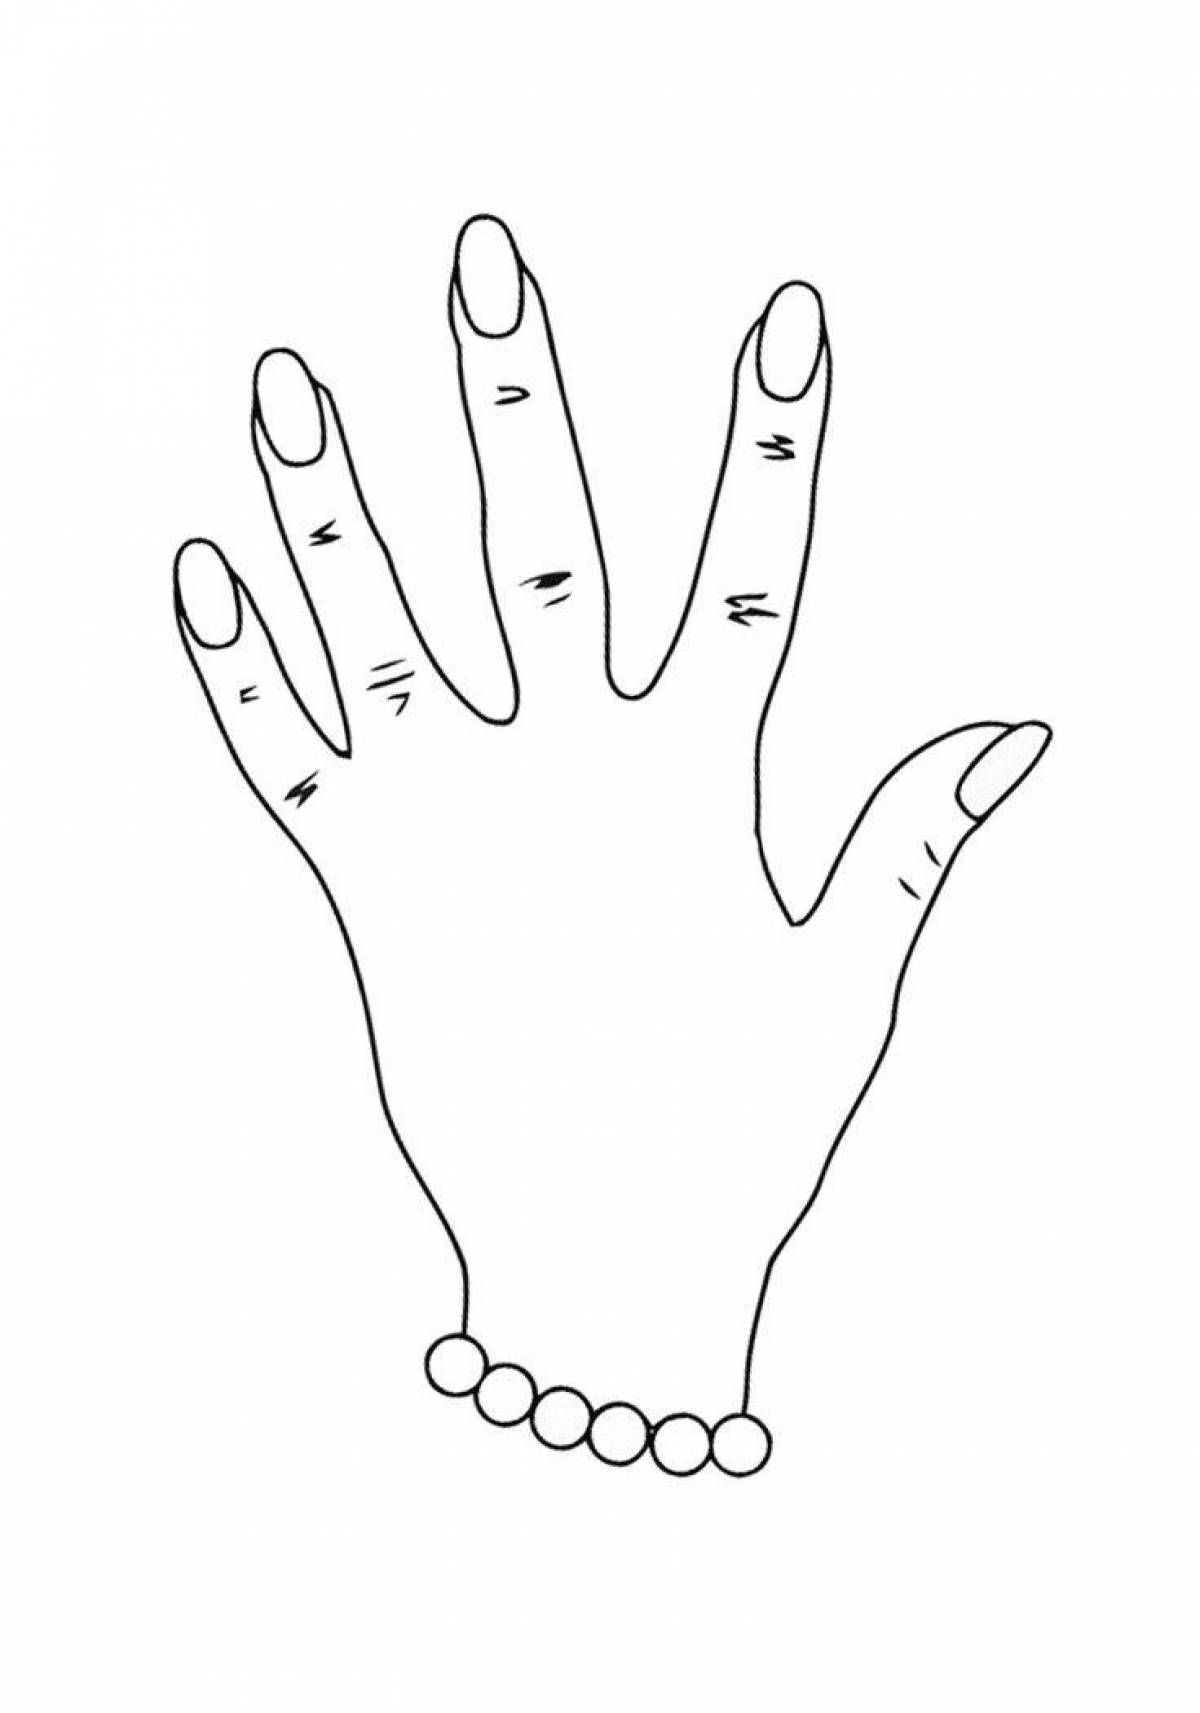 Coloring page charming hand with nails